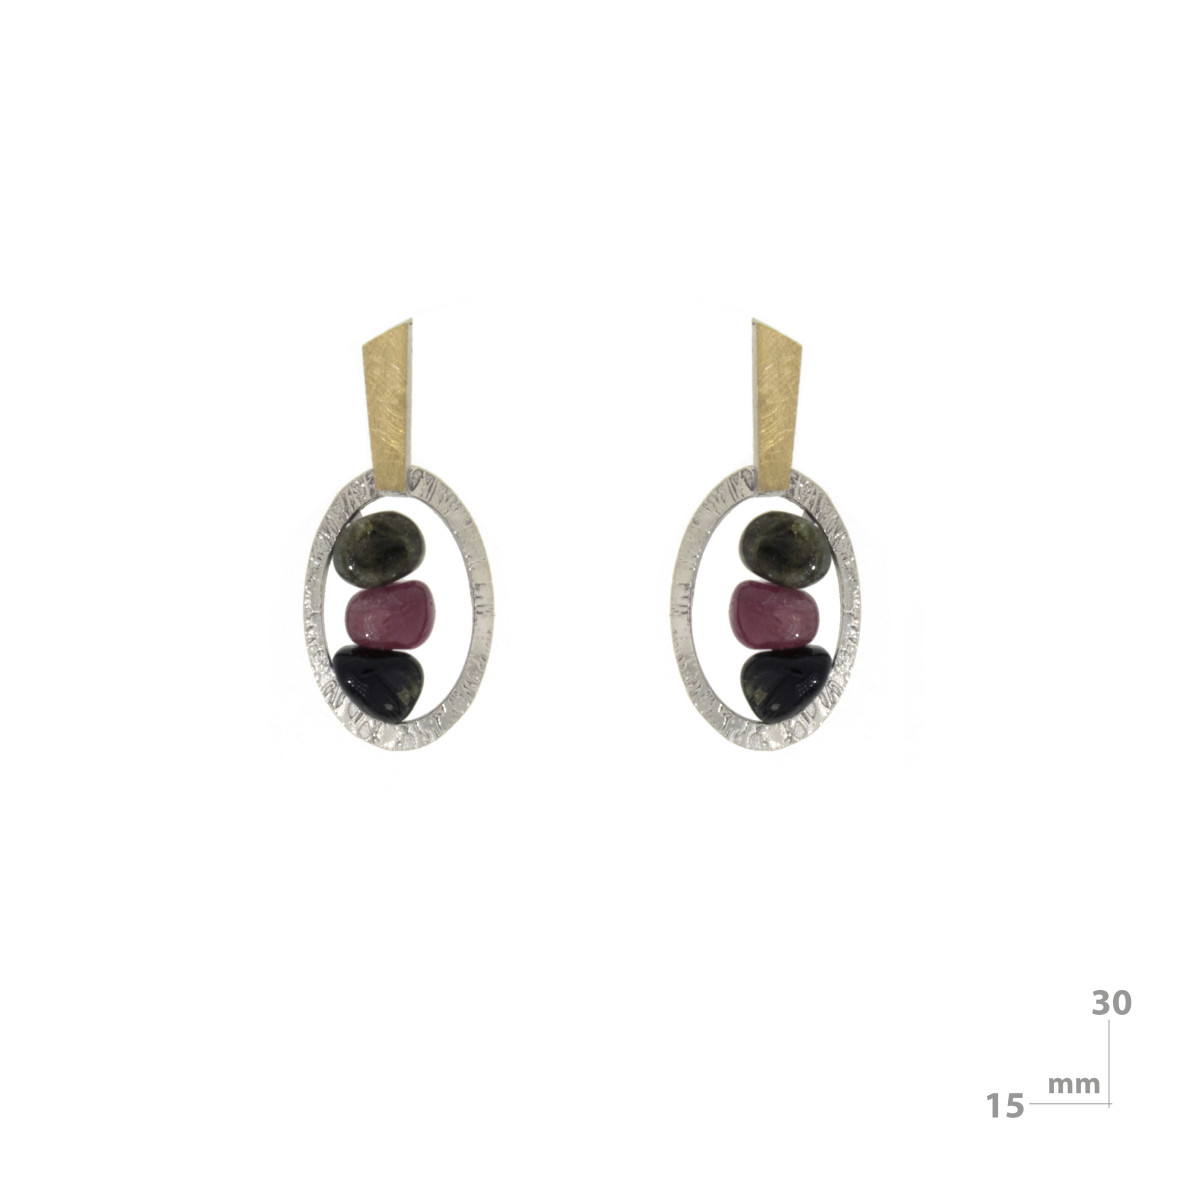 Silver, gold and tourmaline earrings